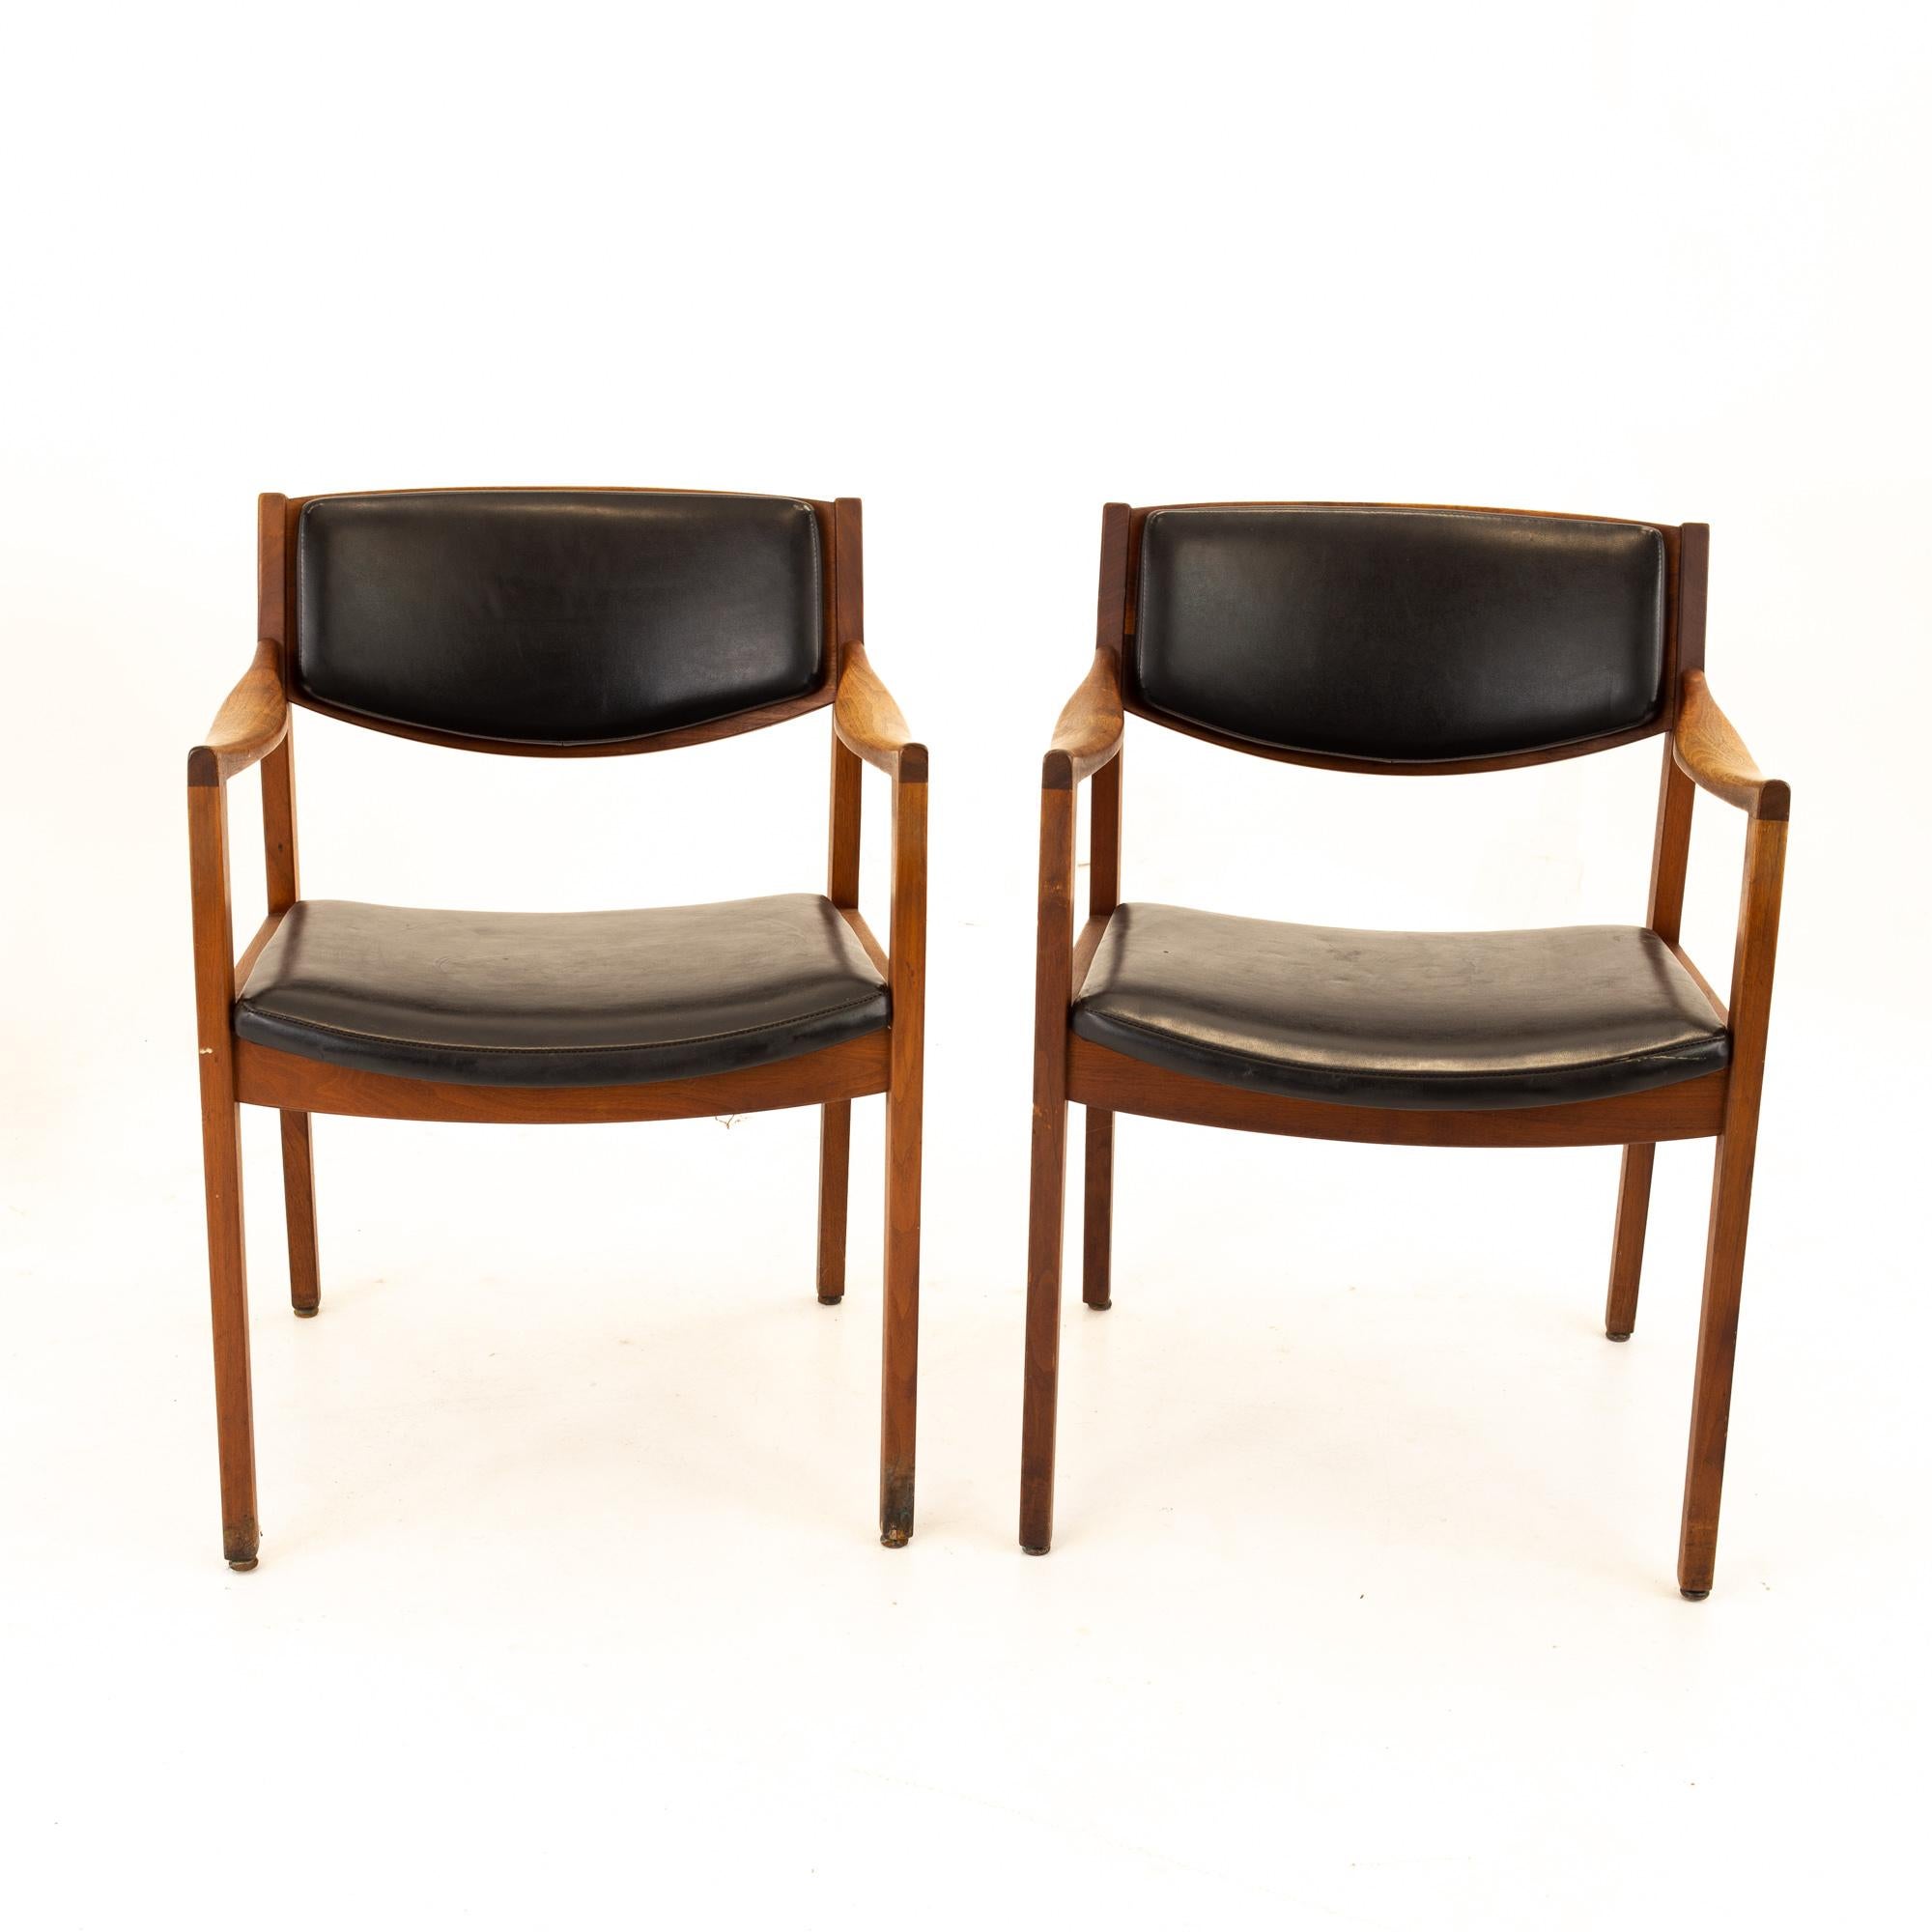 Gunlocke midcentury walnut and black leather chairs, pair
Each chair measures: 22.25 wide x 23 deep x 31 high, with a seat height of 19.25 inches 

All pieces of furniture can be had in what we call restored vintage condition. That means the